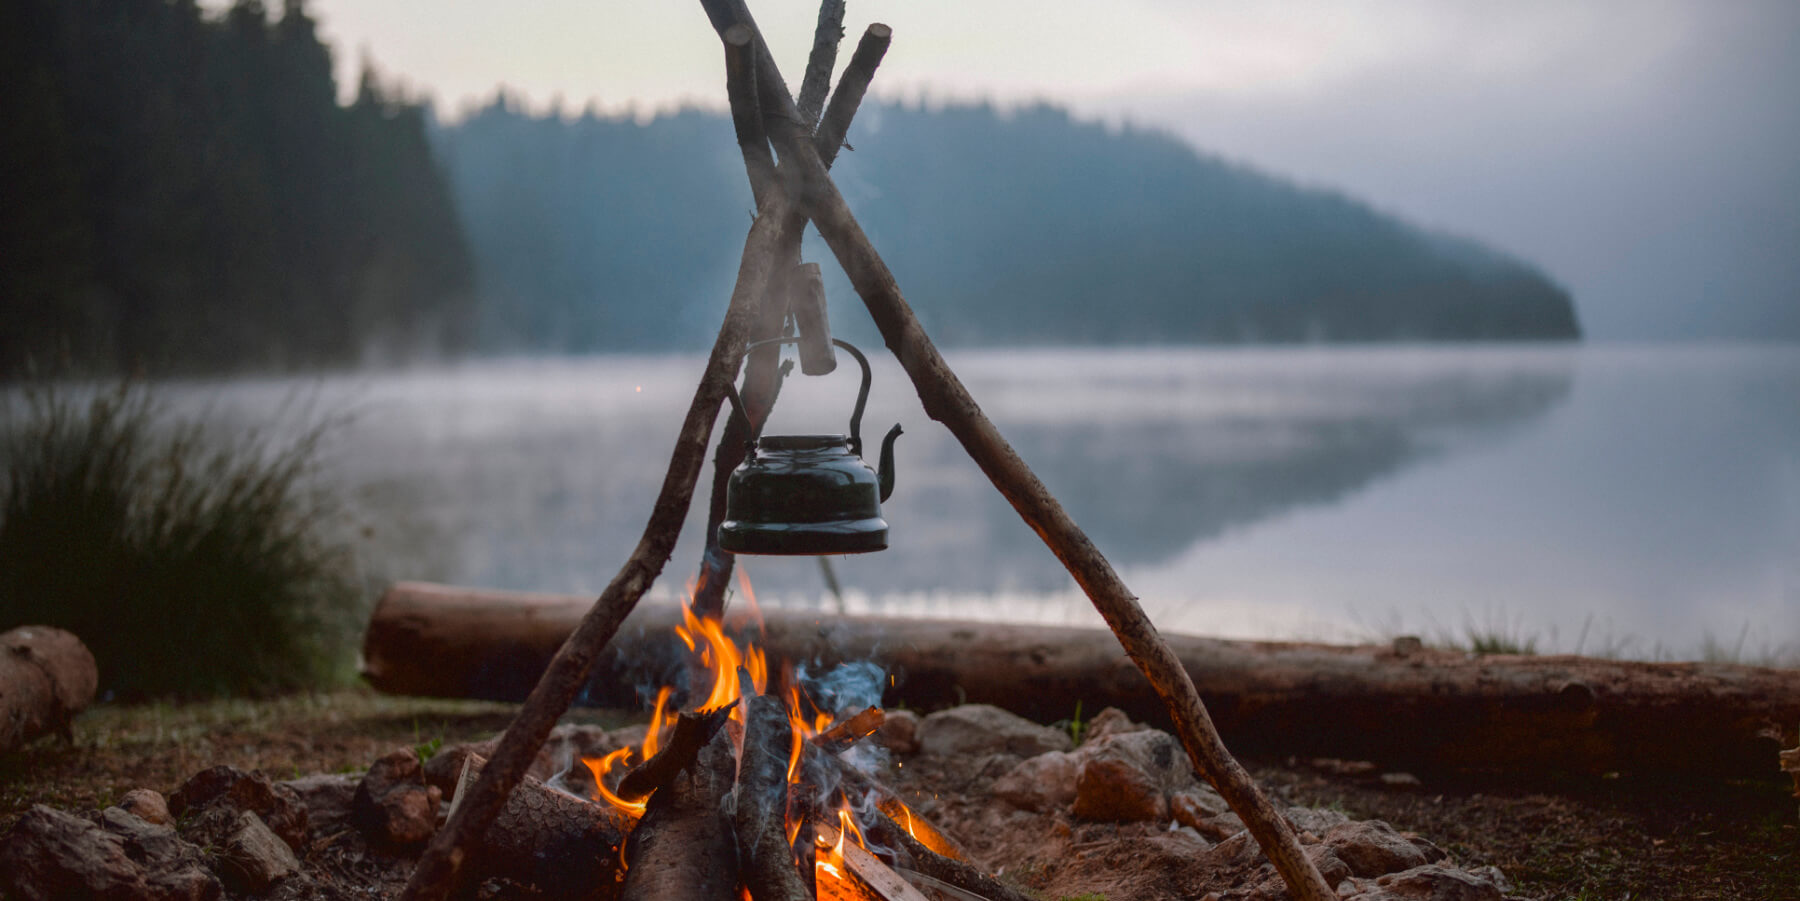 Camping accessories, camp cooking